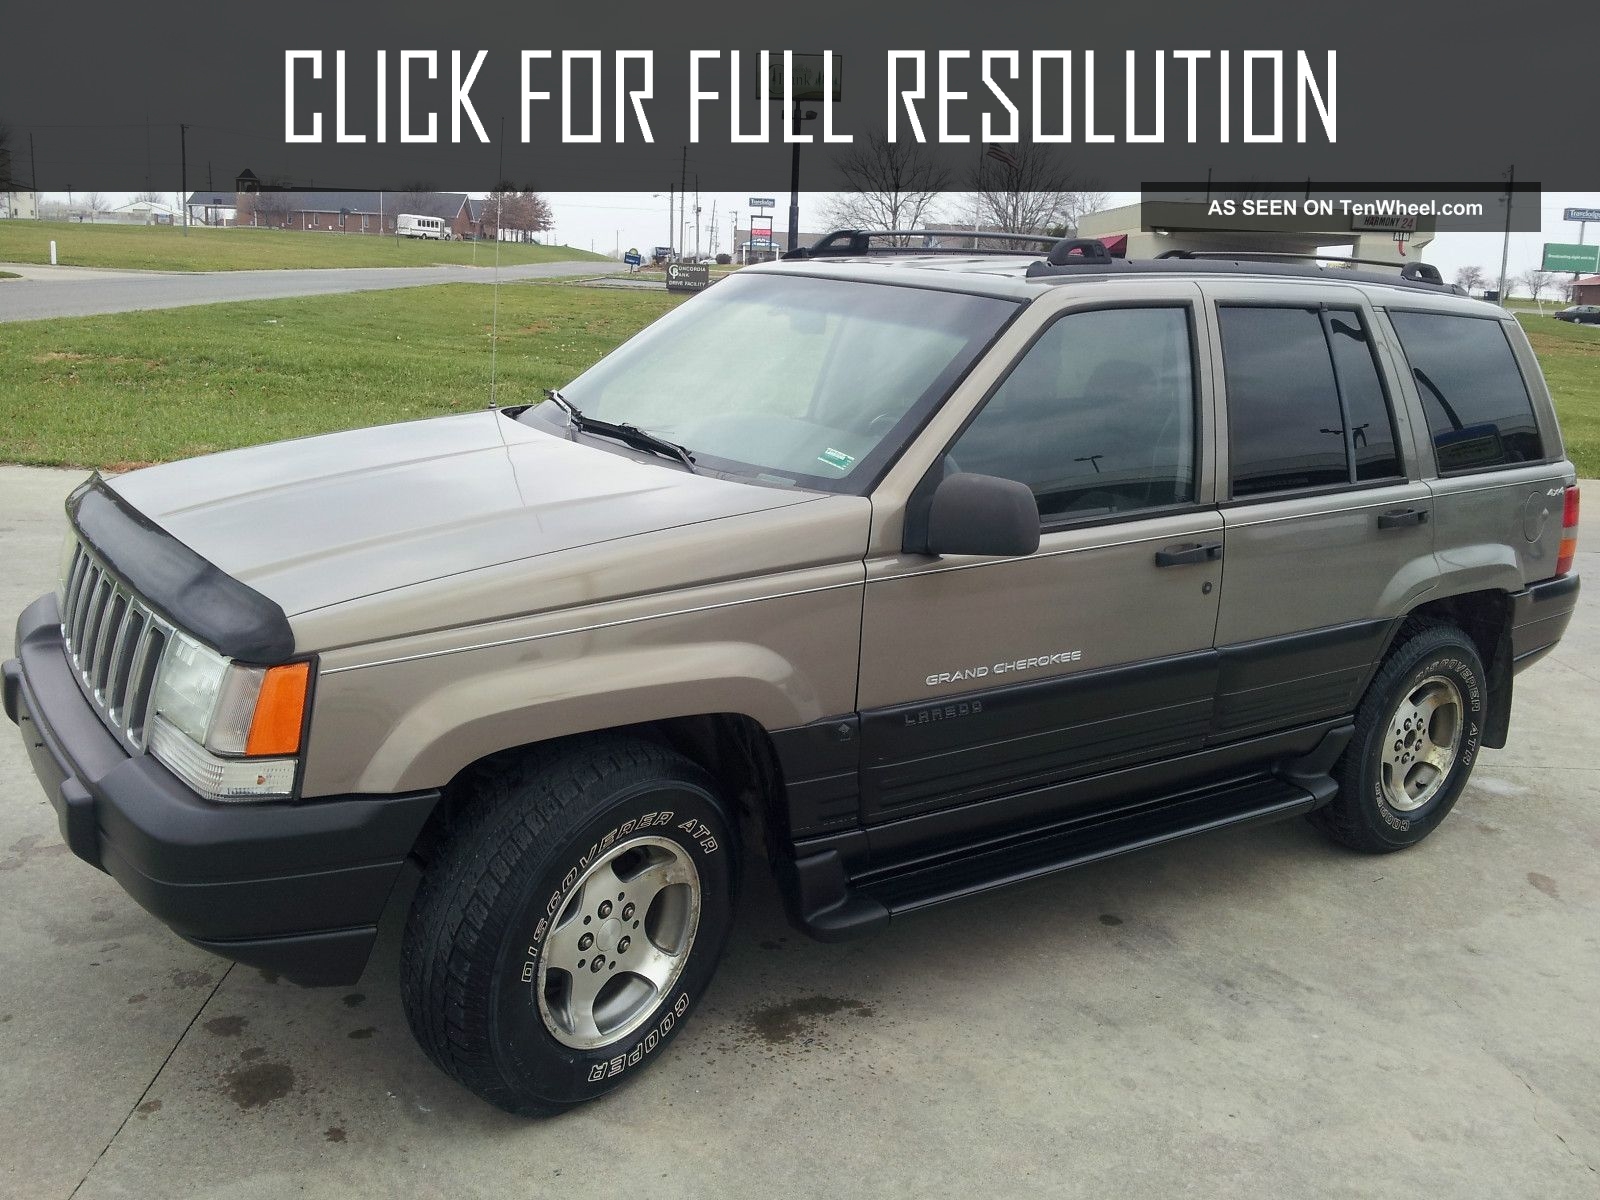 1997 Jeep Cherokee Limited news, reviews, msrp, ratings